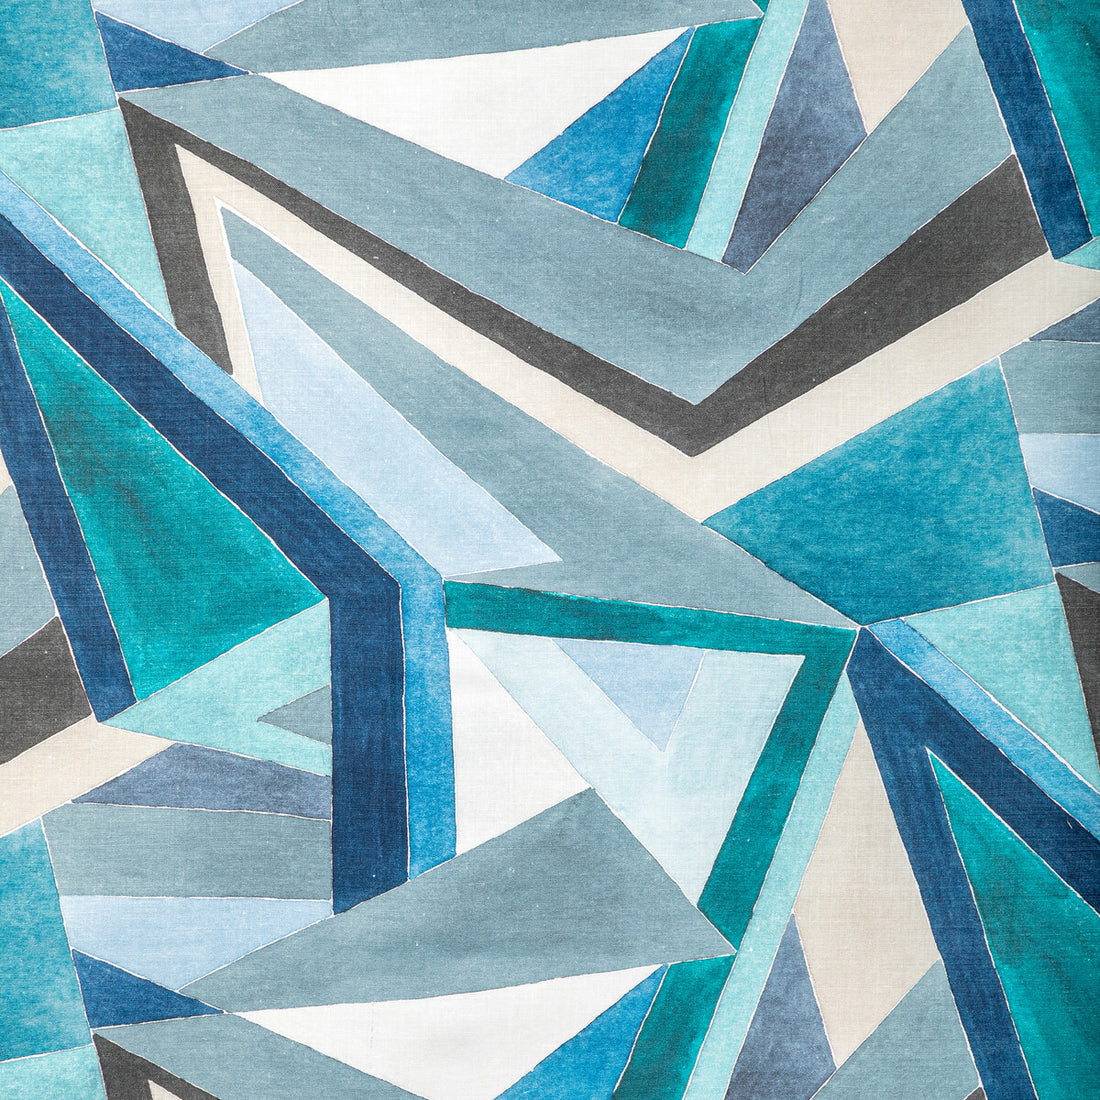 Roulade Print fabric in navy/teal color - pattern GWF-3772.355.0 - by Lee Jofa Modern in the Rhapsody collection